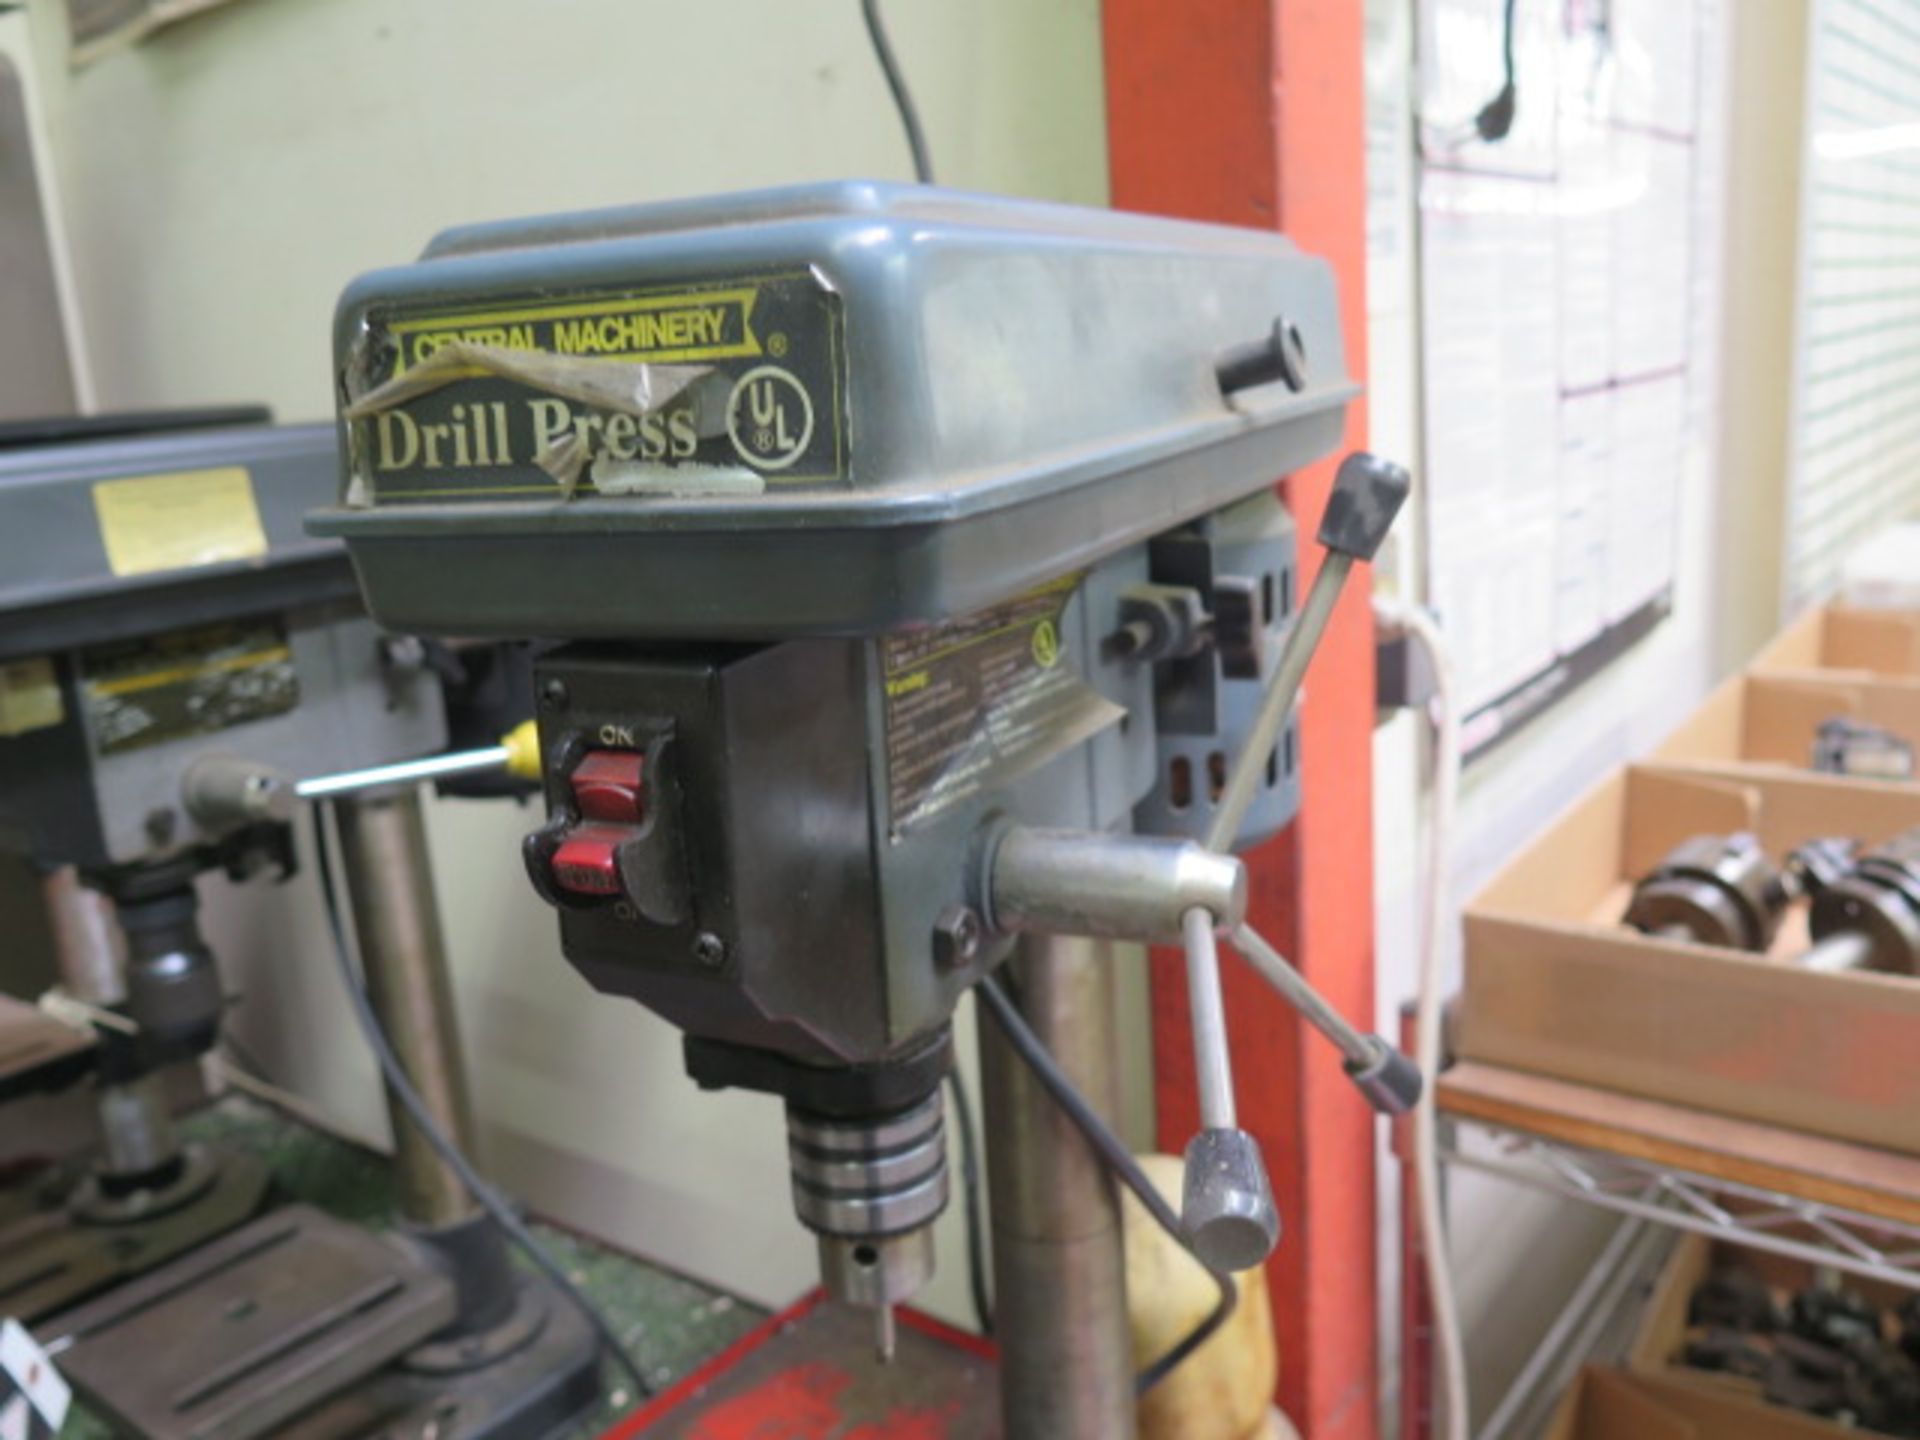 Central Machinery Table Model Drill Press (SOLD AS-IS - NO WARRANTY) - Image 3 of 3